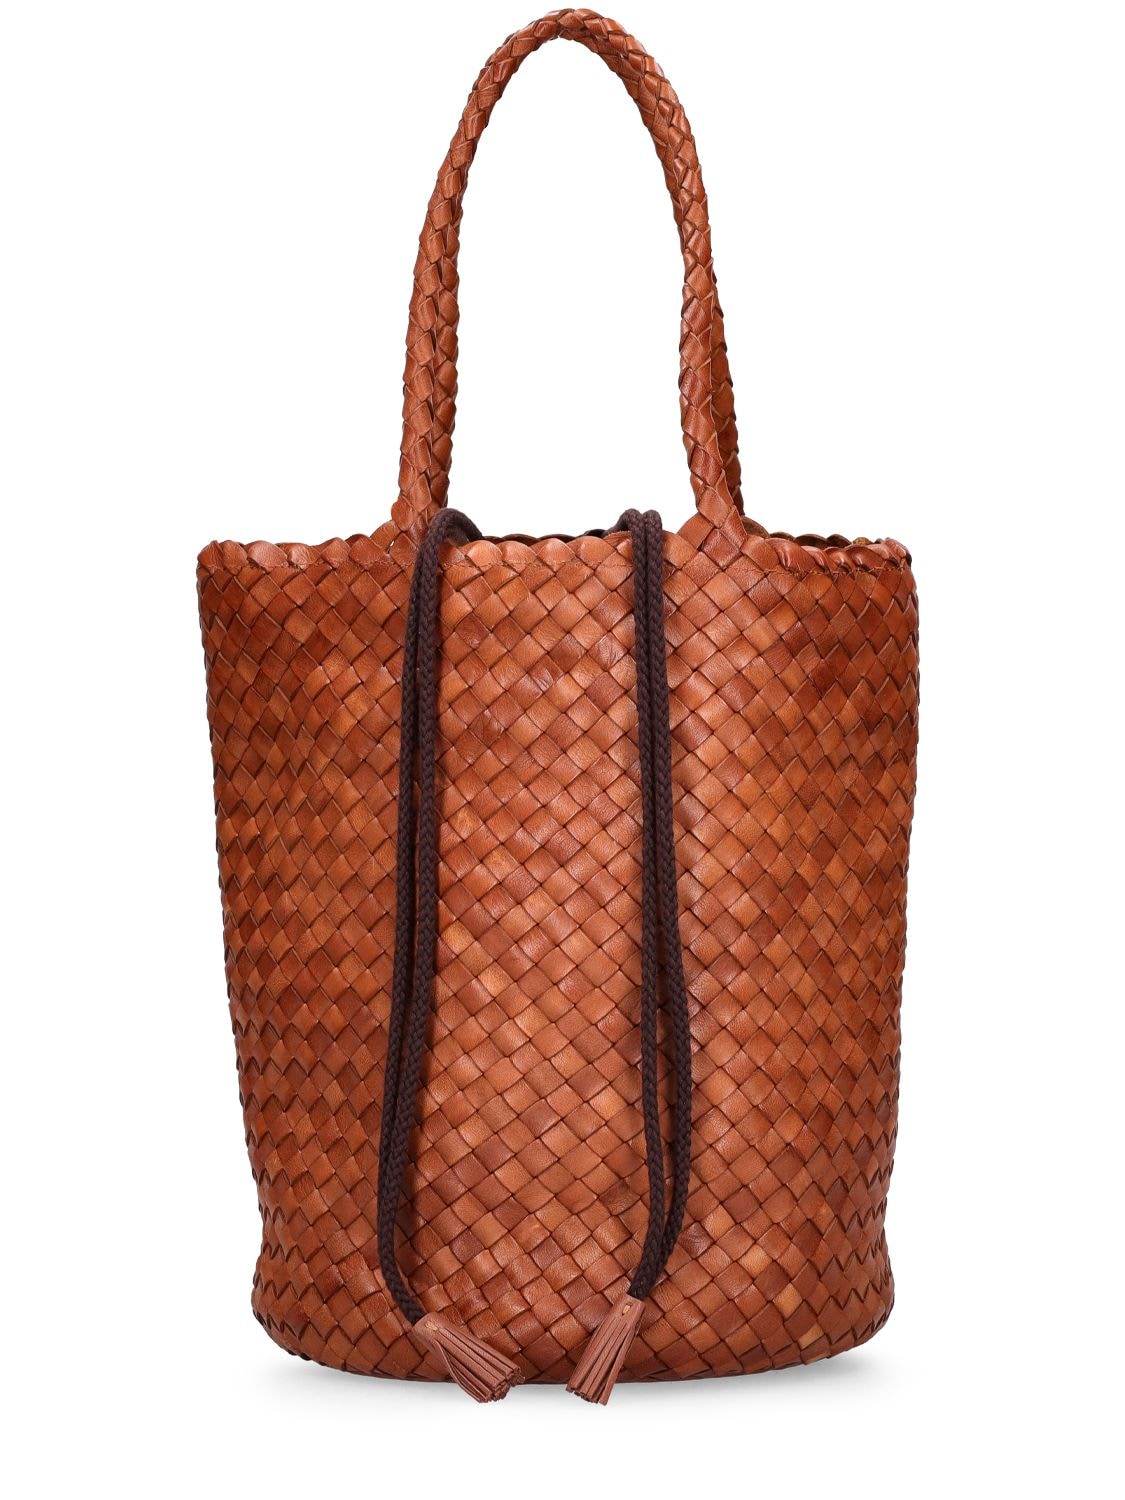 DRAGON DIFFUSION Hand Braided Leather Straps Basket Bag